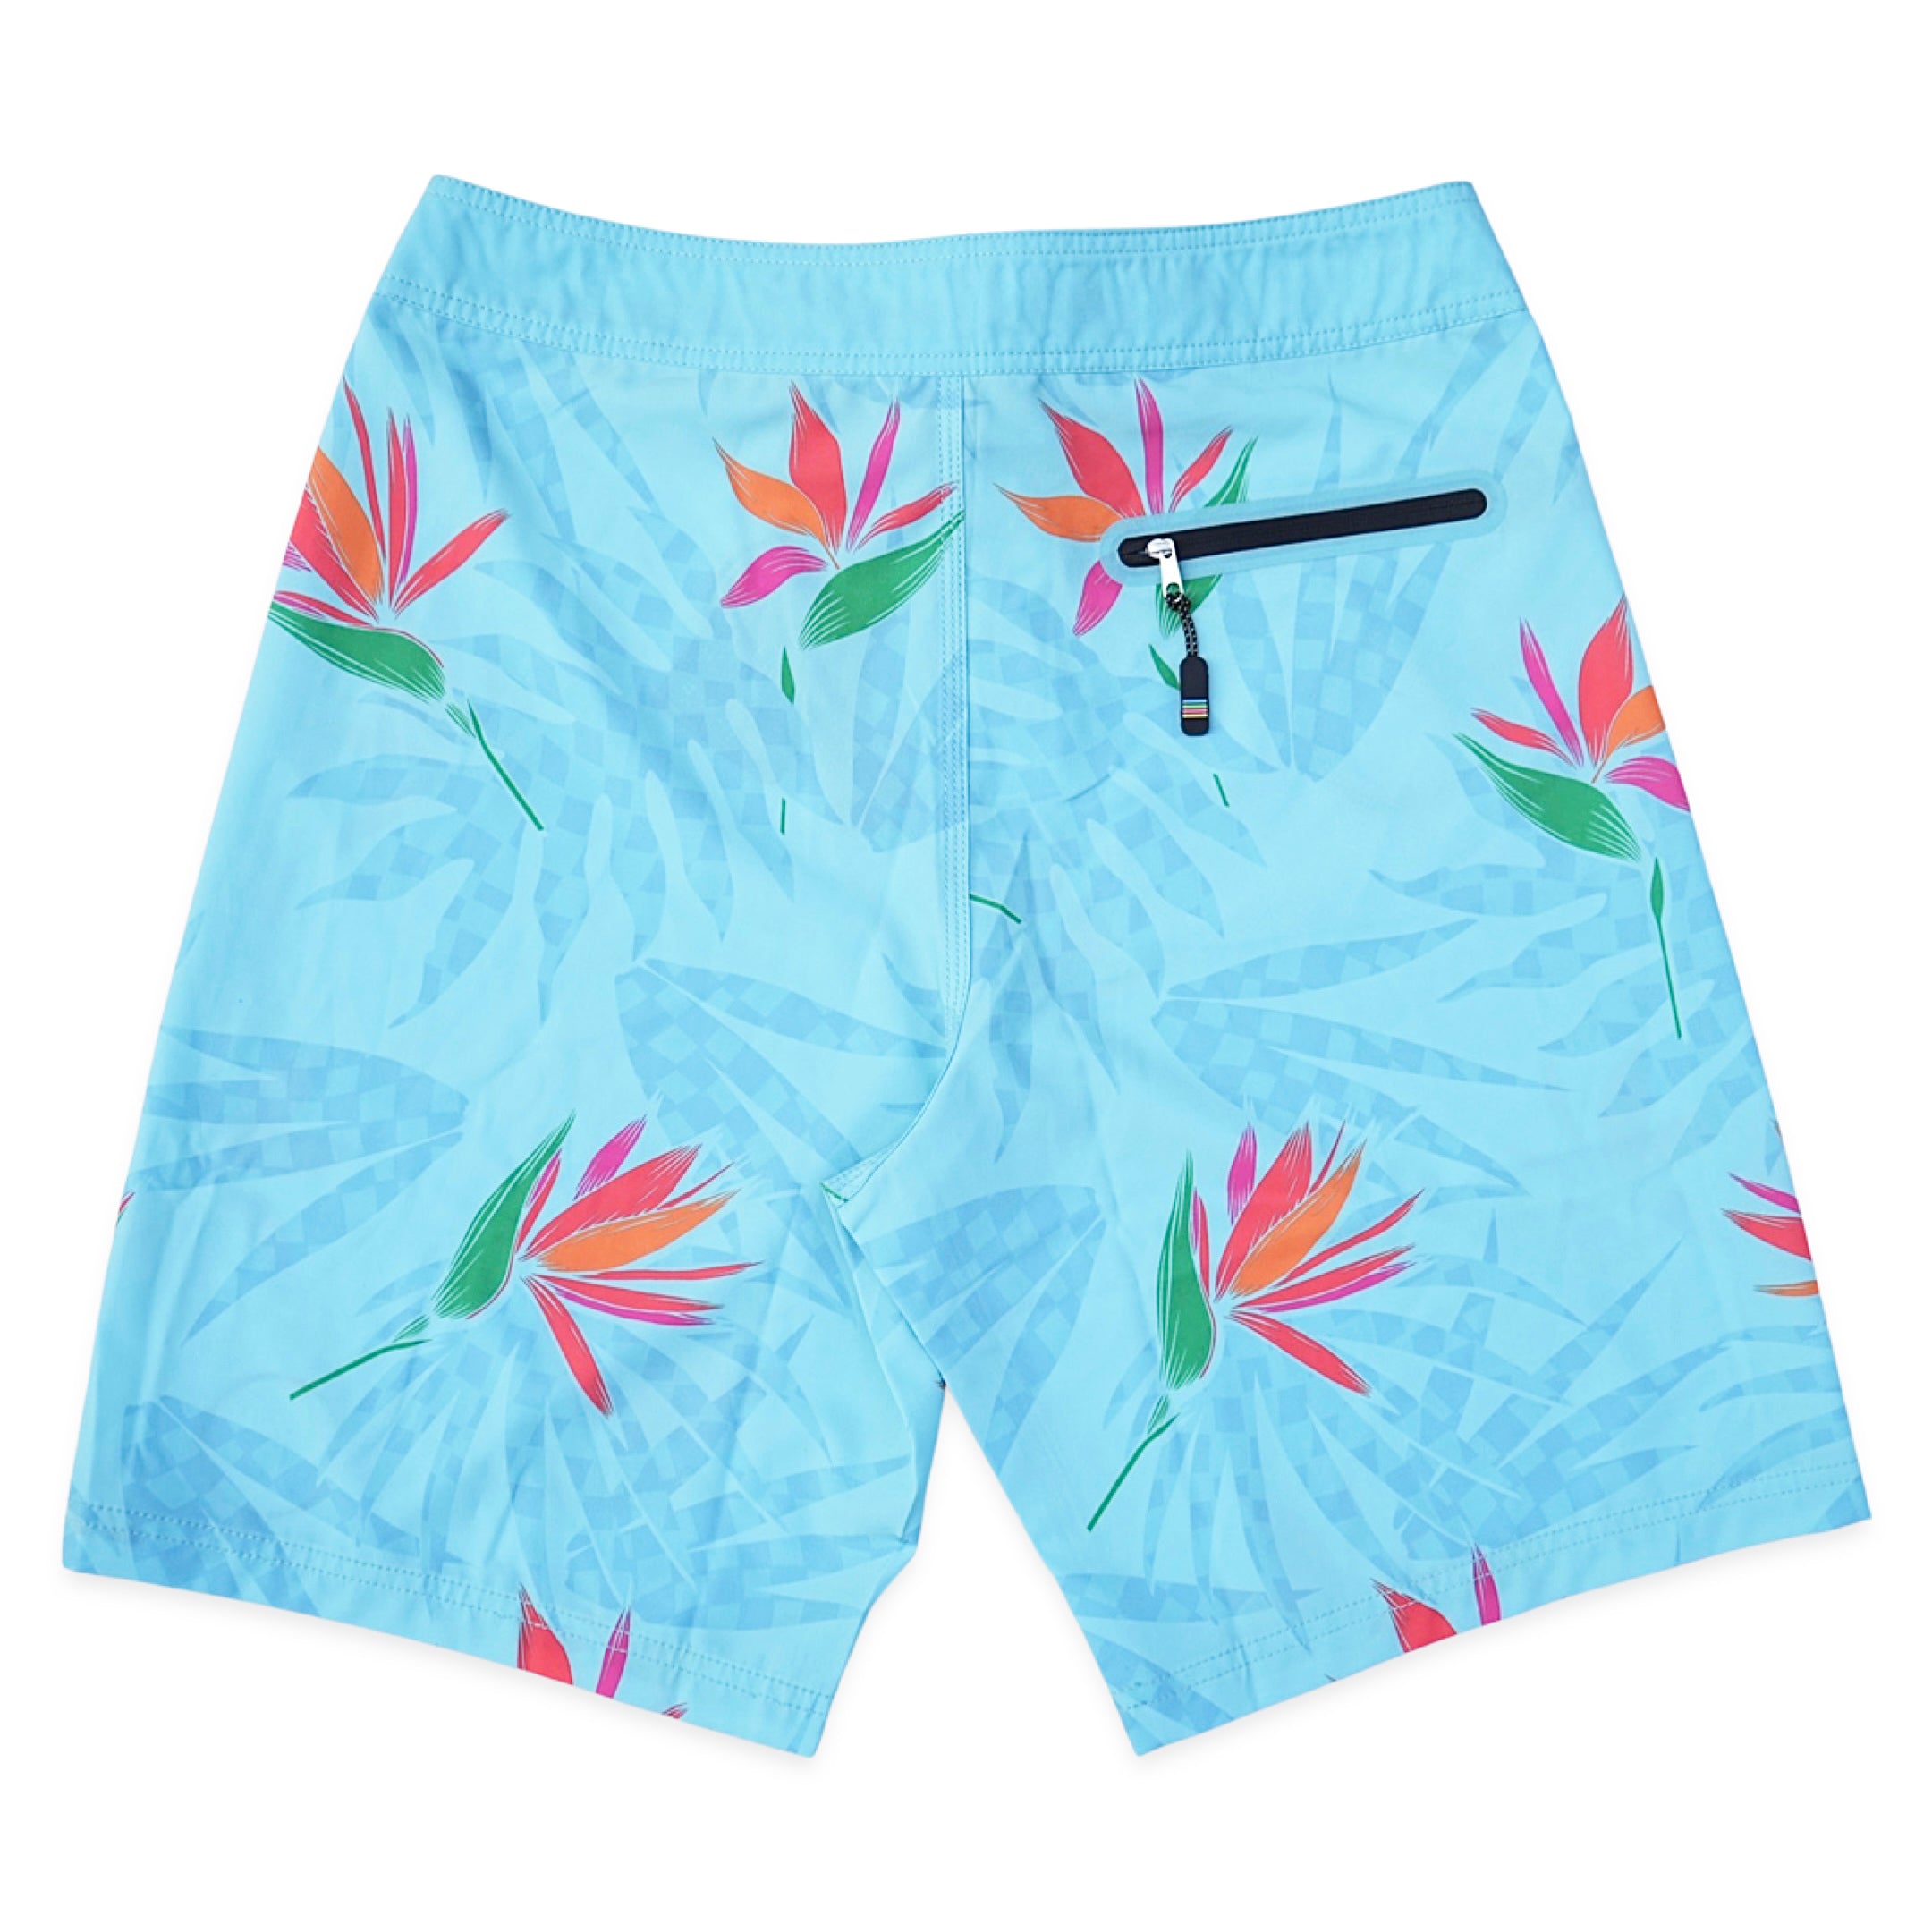 Paradise Check Board Shorts in Blue